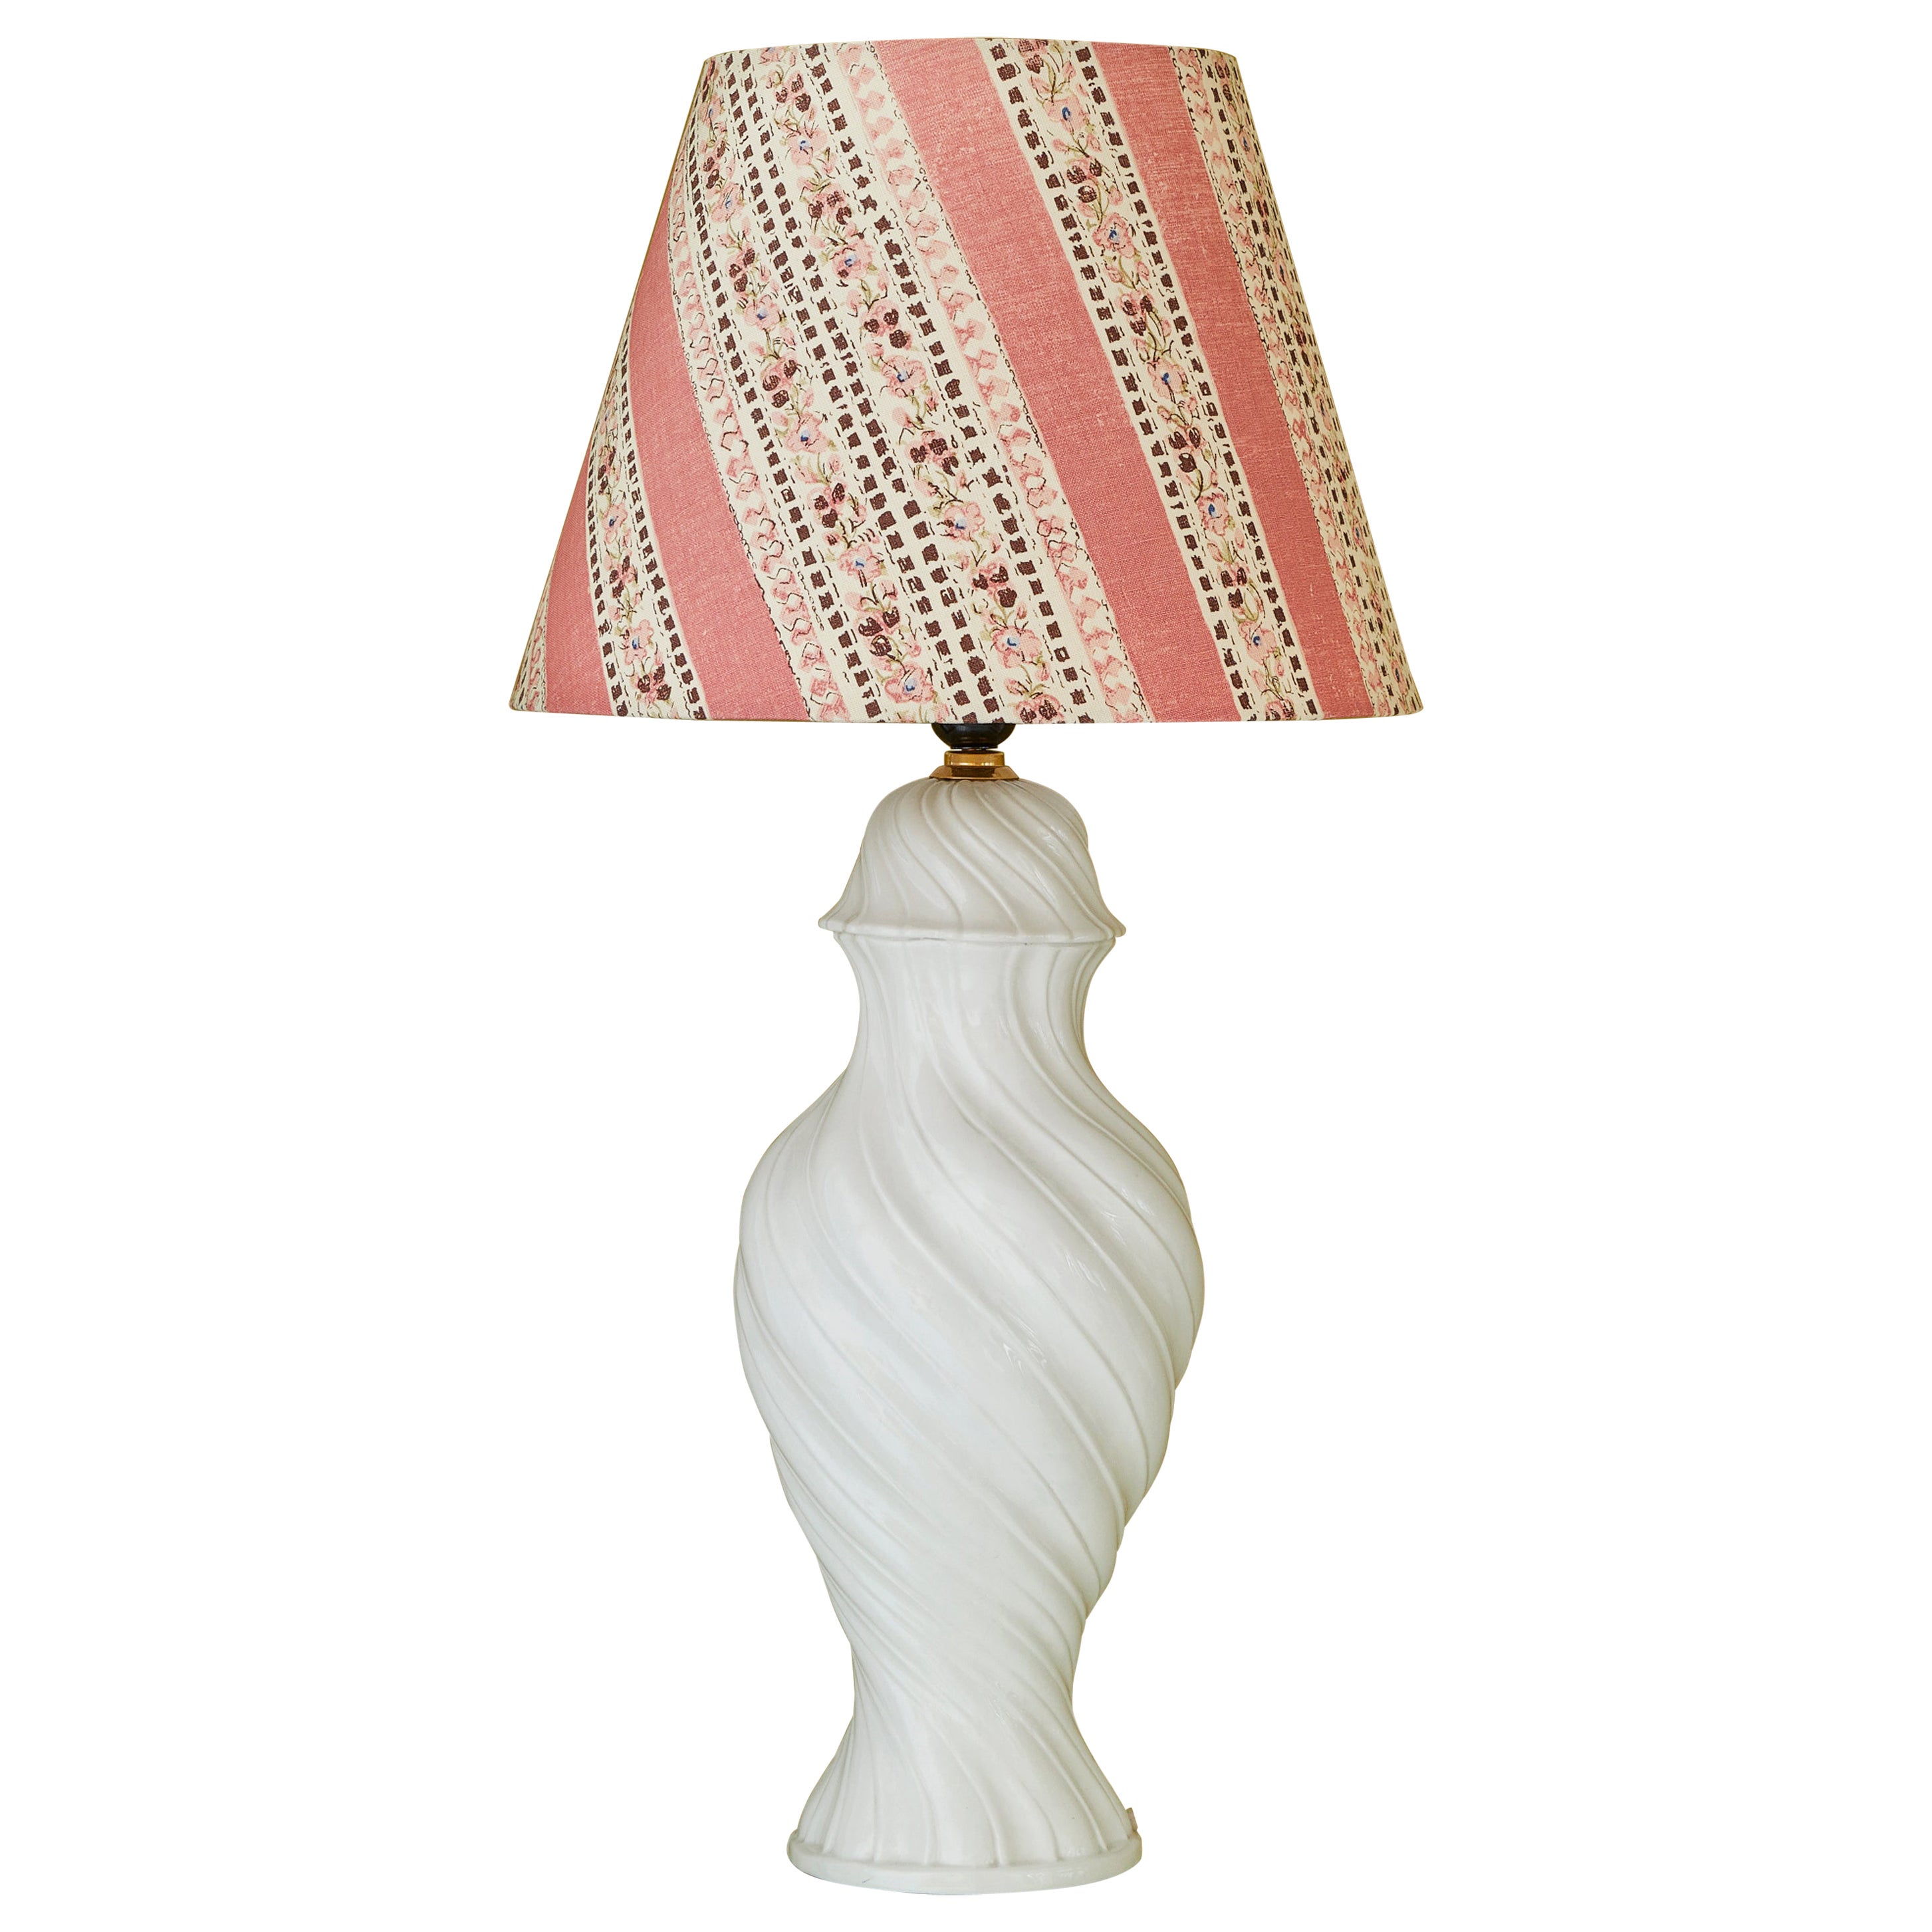 Vintage Ceramic Table Lamp with Customized Shade, Italy, 20th Century For Sale